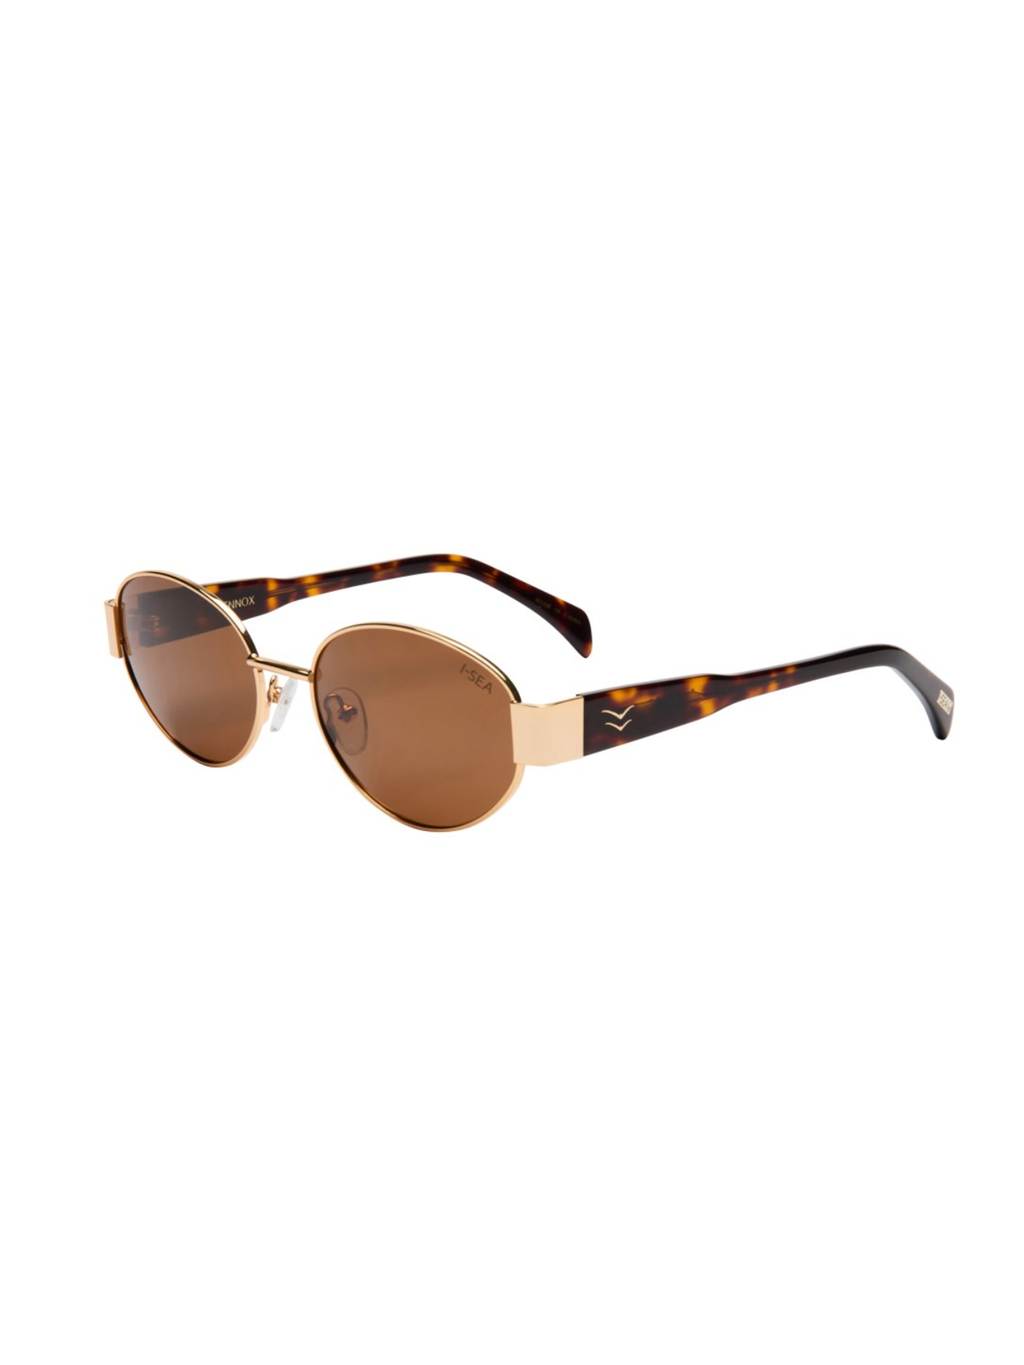 Lennox Sunnies in Gold/Brown - Stitch And Feather